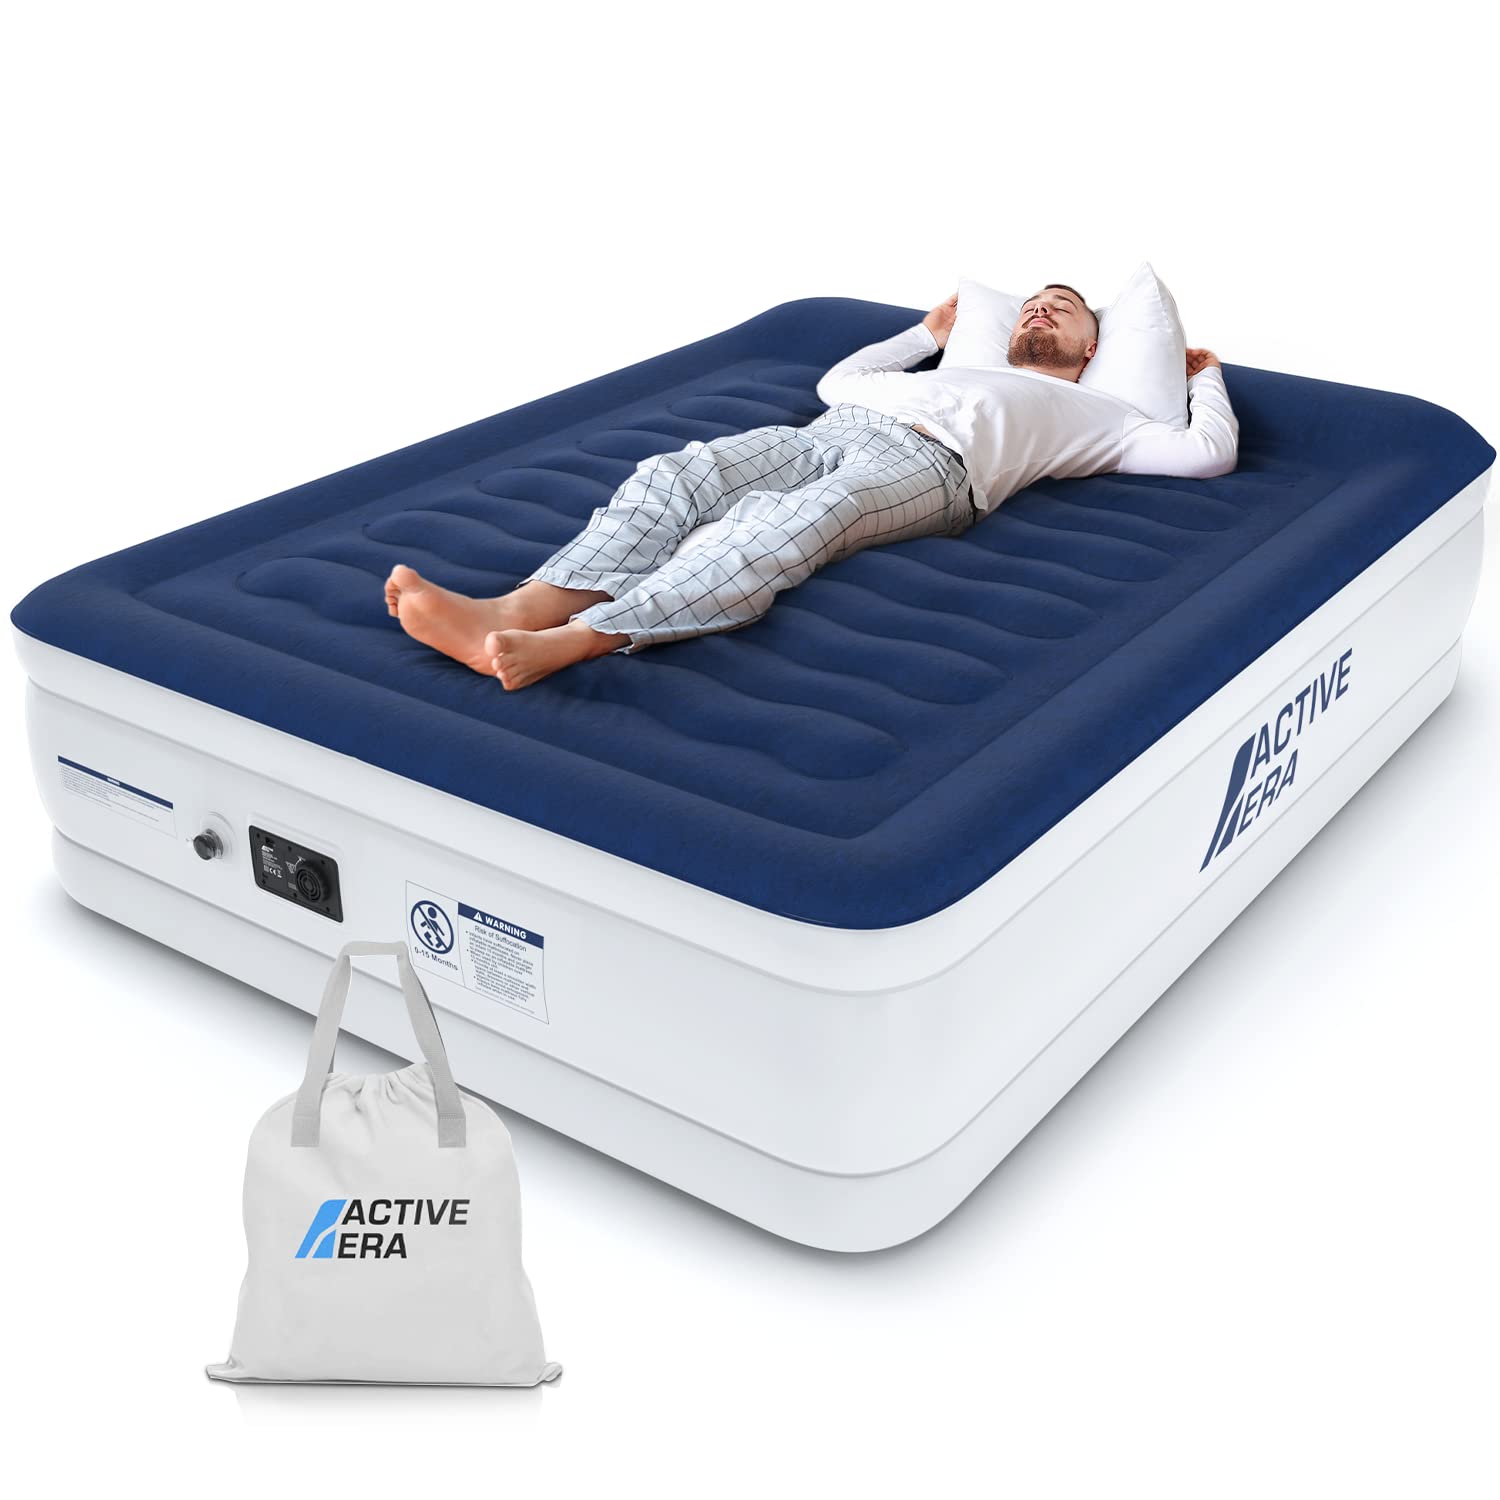 Active Era Luxury King Size Double Queen Air Bed - Elevated Inflatable Air Mattress, Electric Built-in Pump, Raised Pillow & Structured I-Beam Technology, Height 56cm